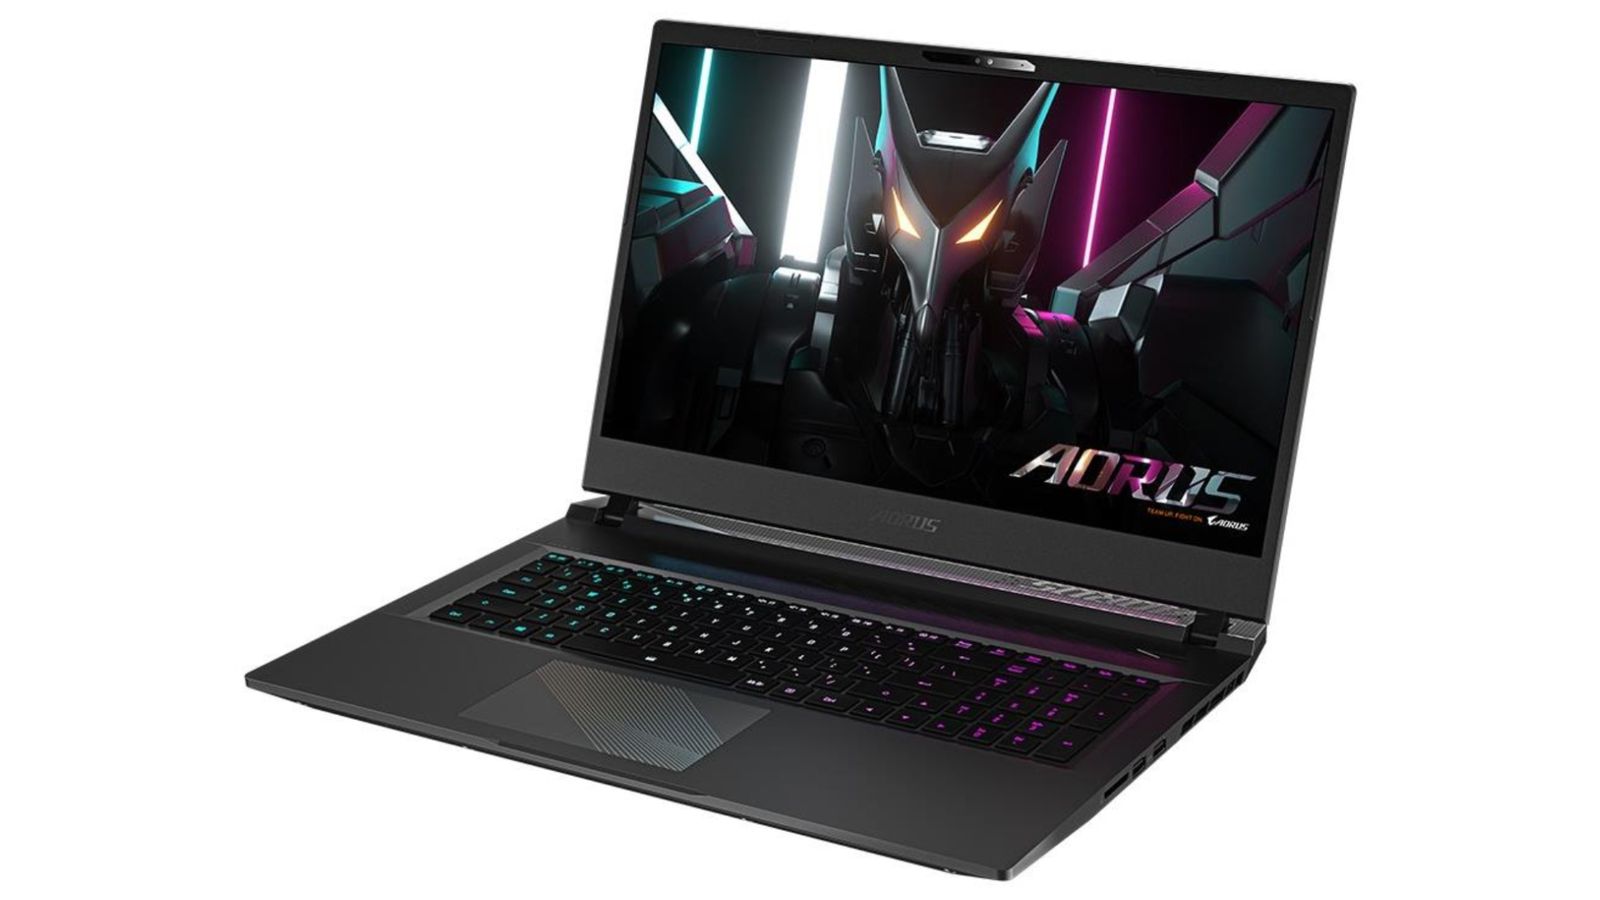 Best Diablo 4 gaming laptop - Gigabyte AORUS 17 product image of a black laptop with purple and blue backlit keys and a mechanical animal on the display.